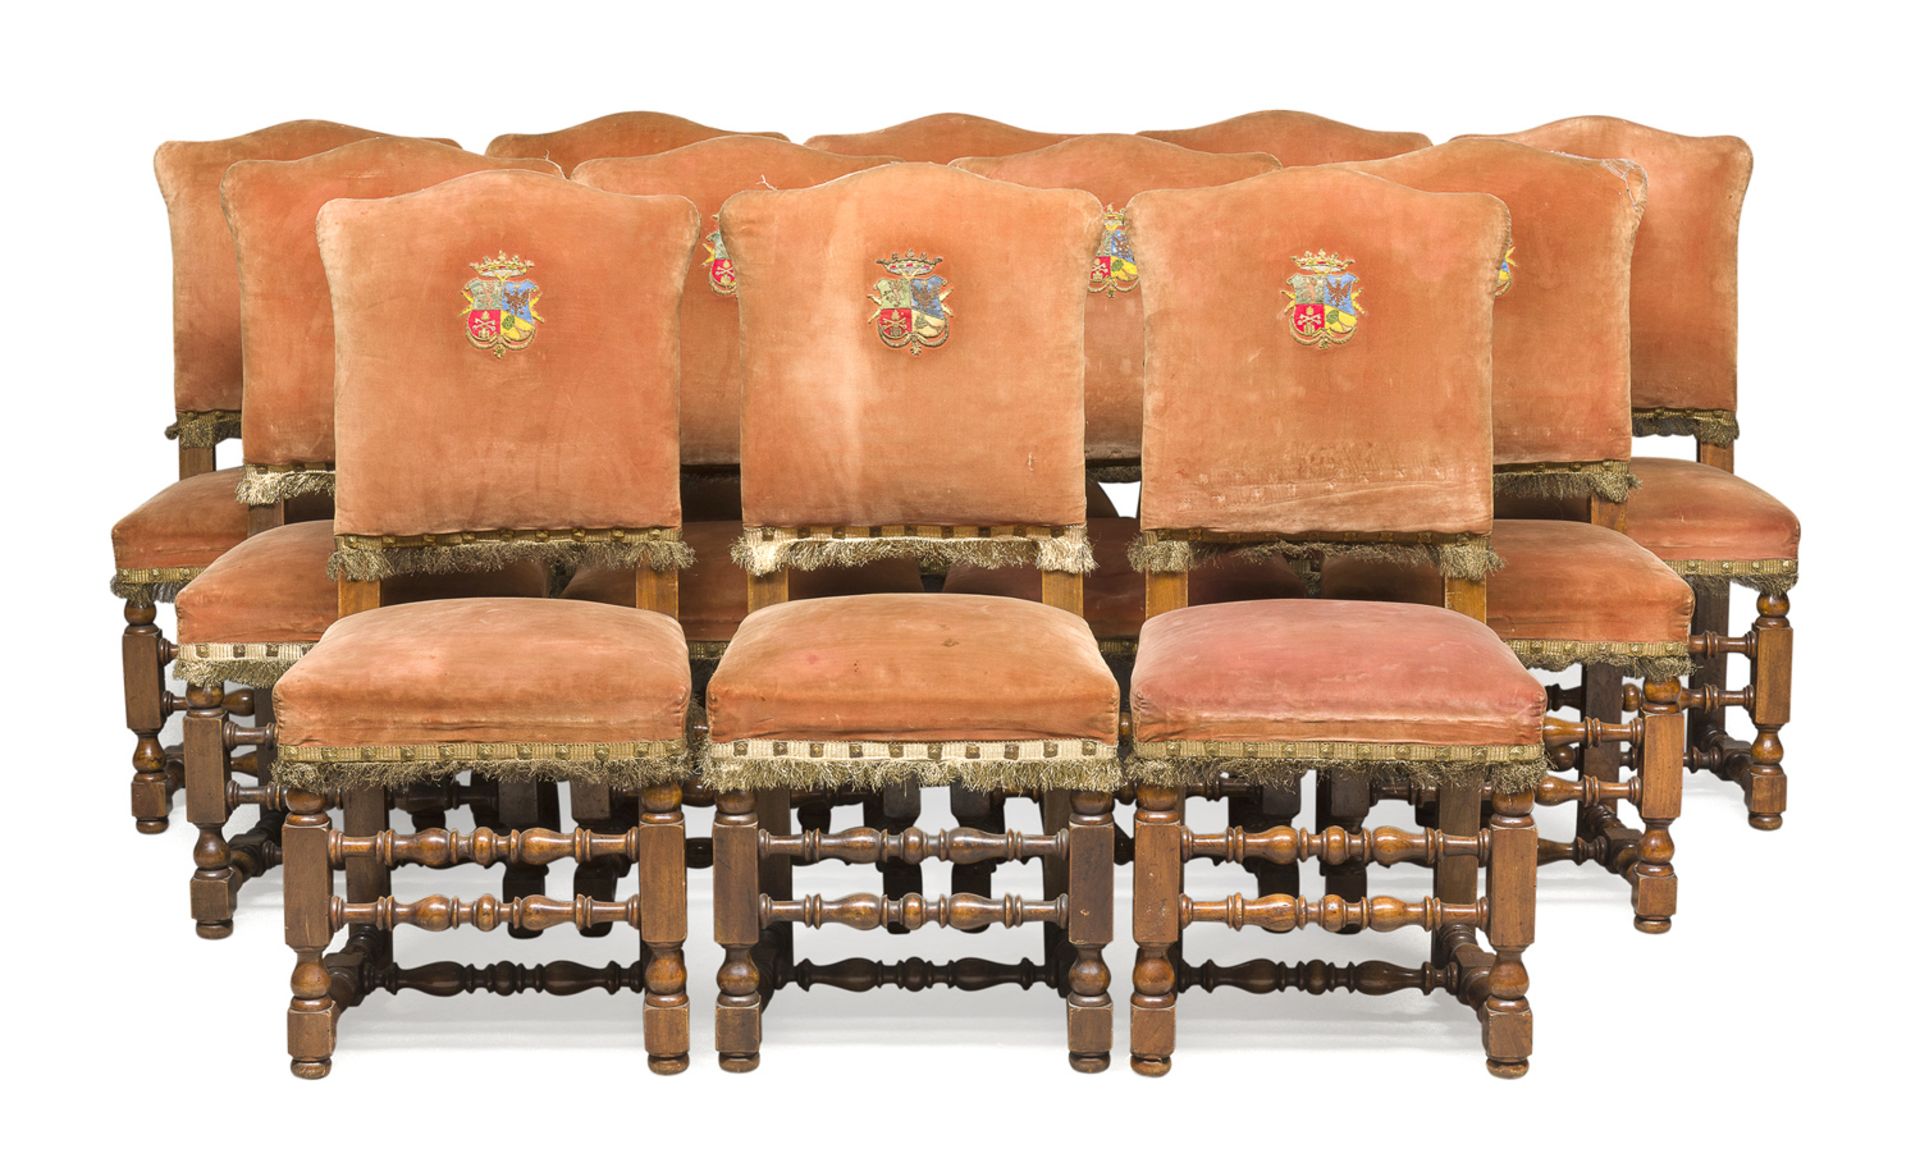 TWELVE NOBLE CHAIRS LATE 19TH CENTURY